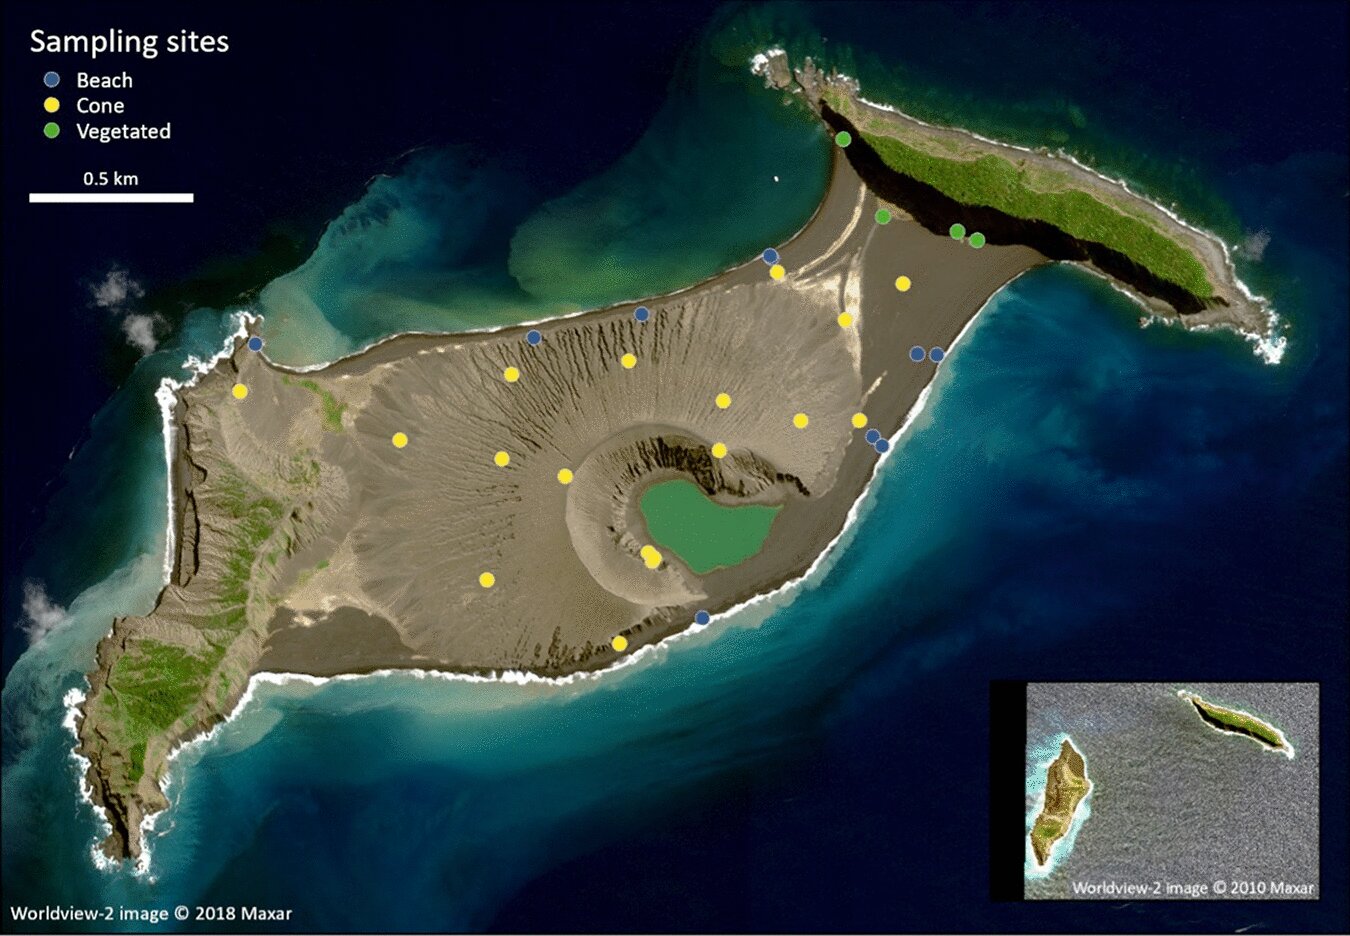 Rare opportunity to study short-lived volcanic island reveals 